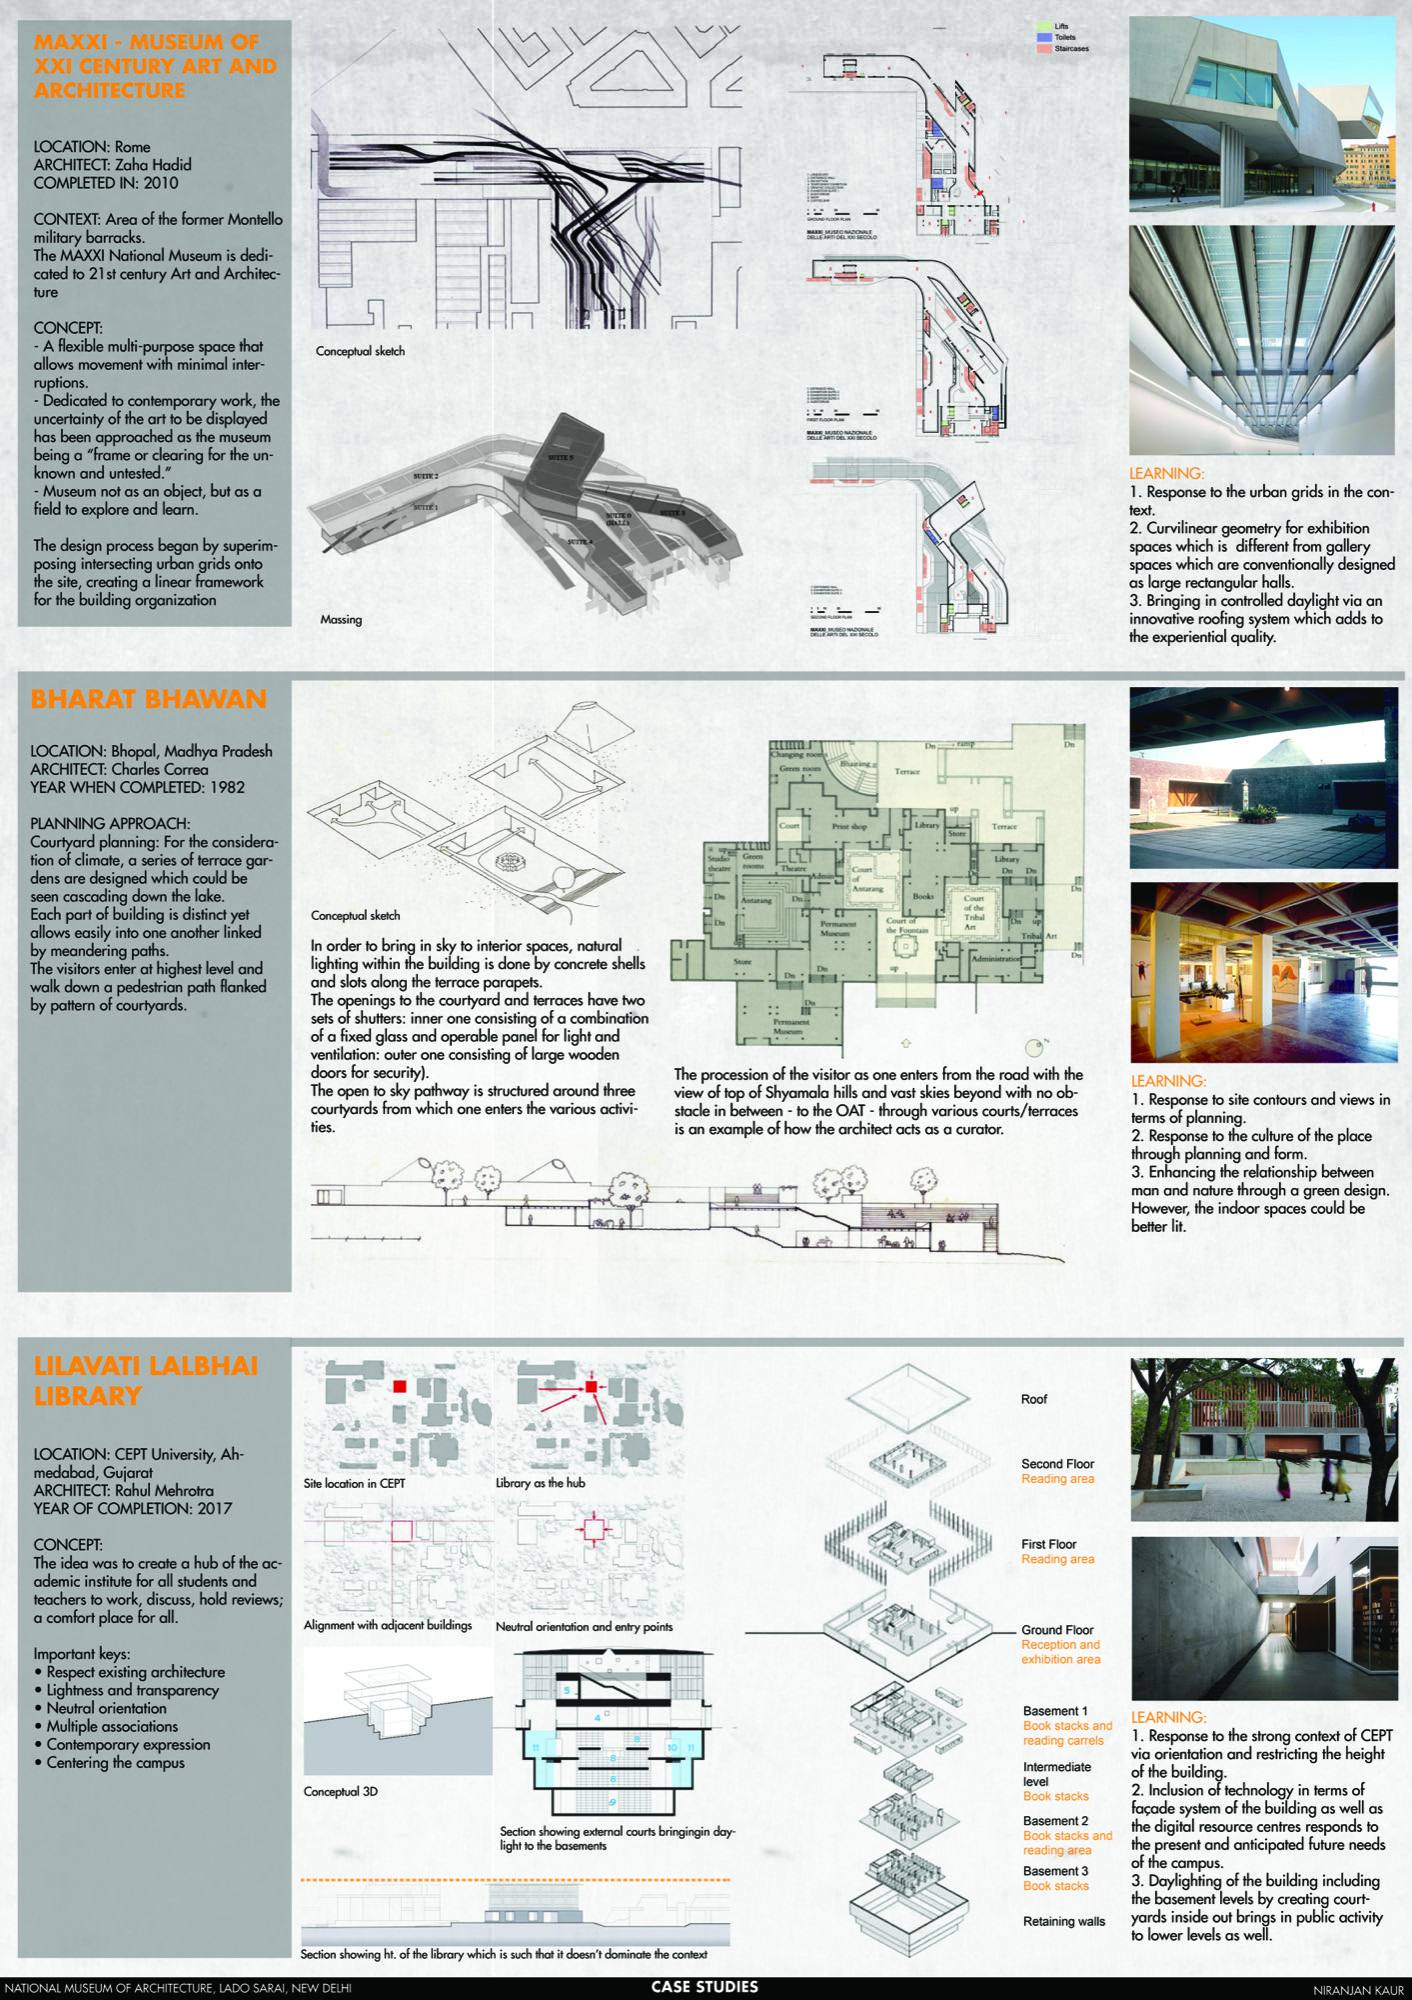 B.Arch Thesis: National Museum of Architecture, New Delhi, by Niranjan Kaur 14